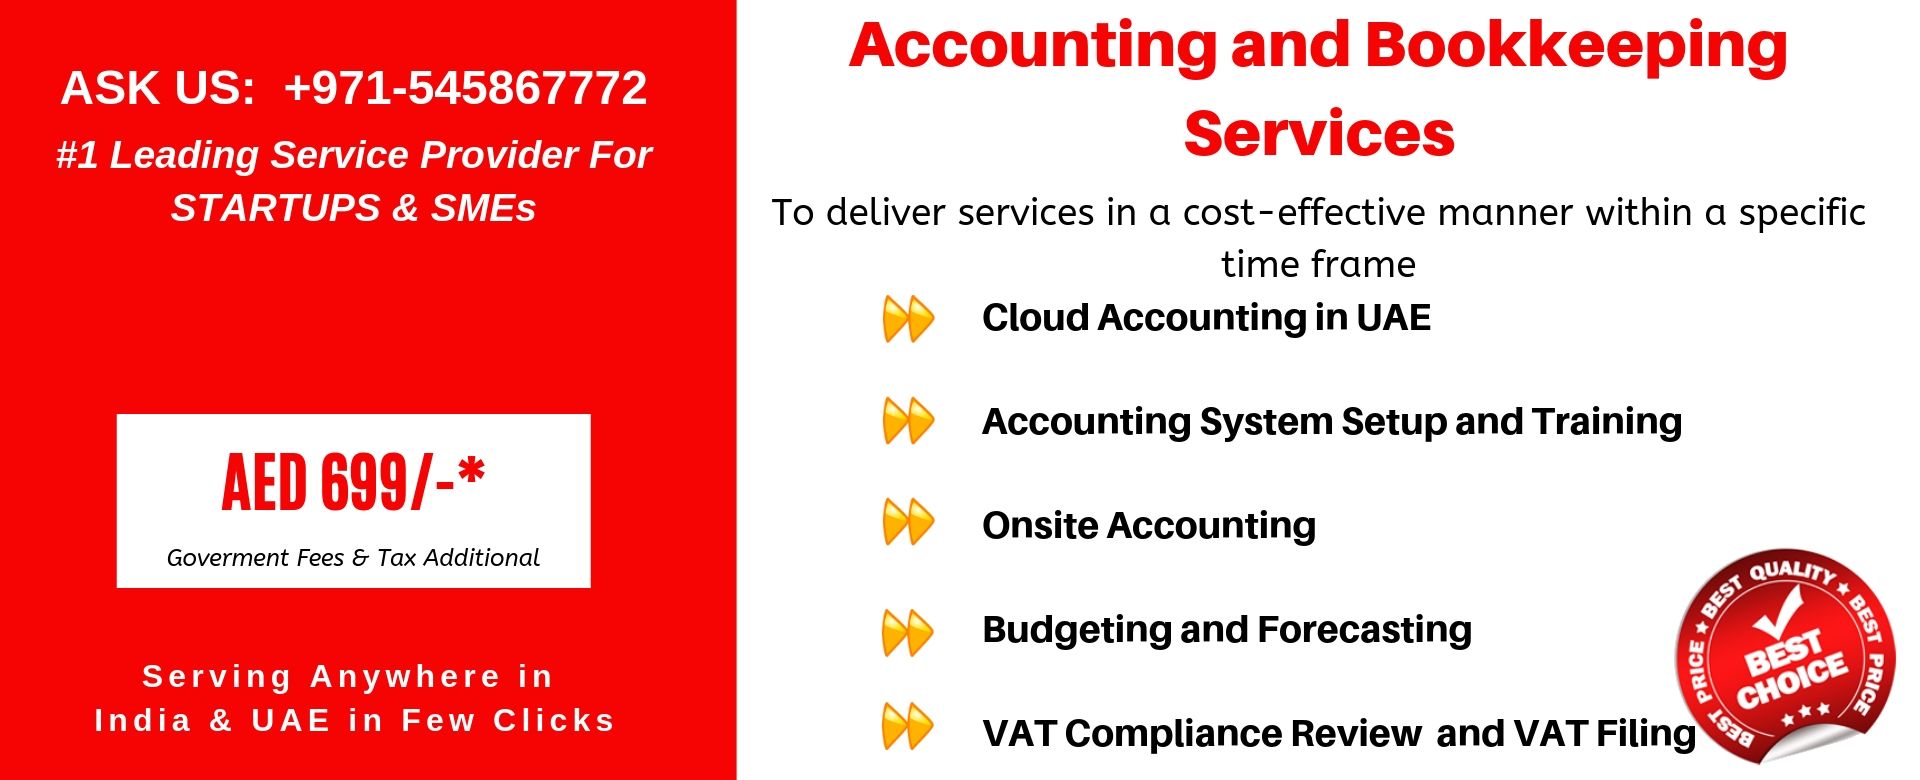 accounting and bookkeeping services in uae